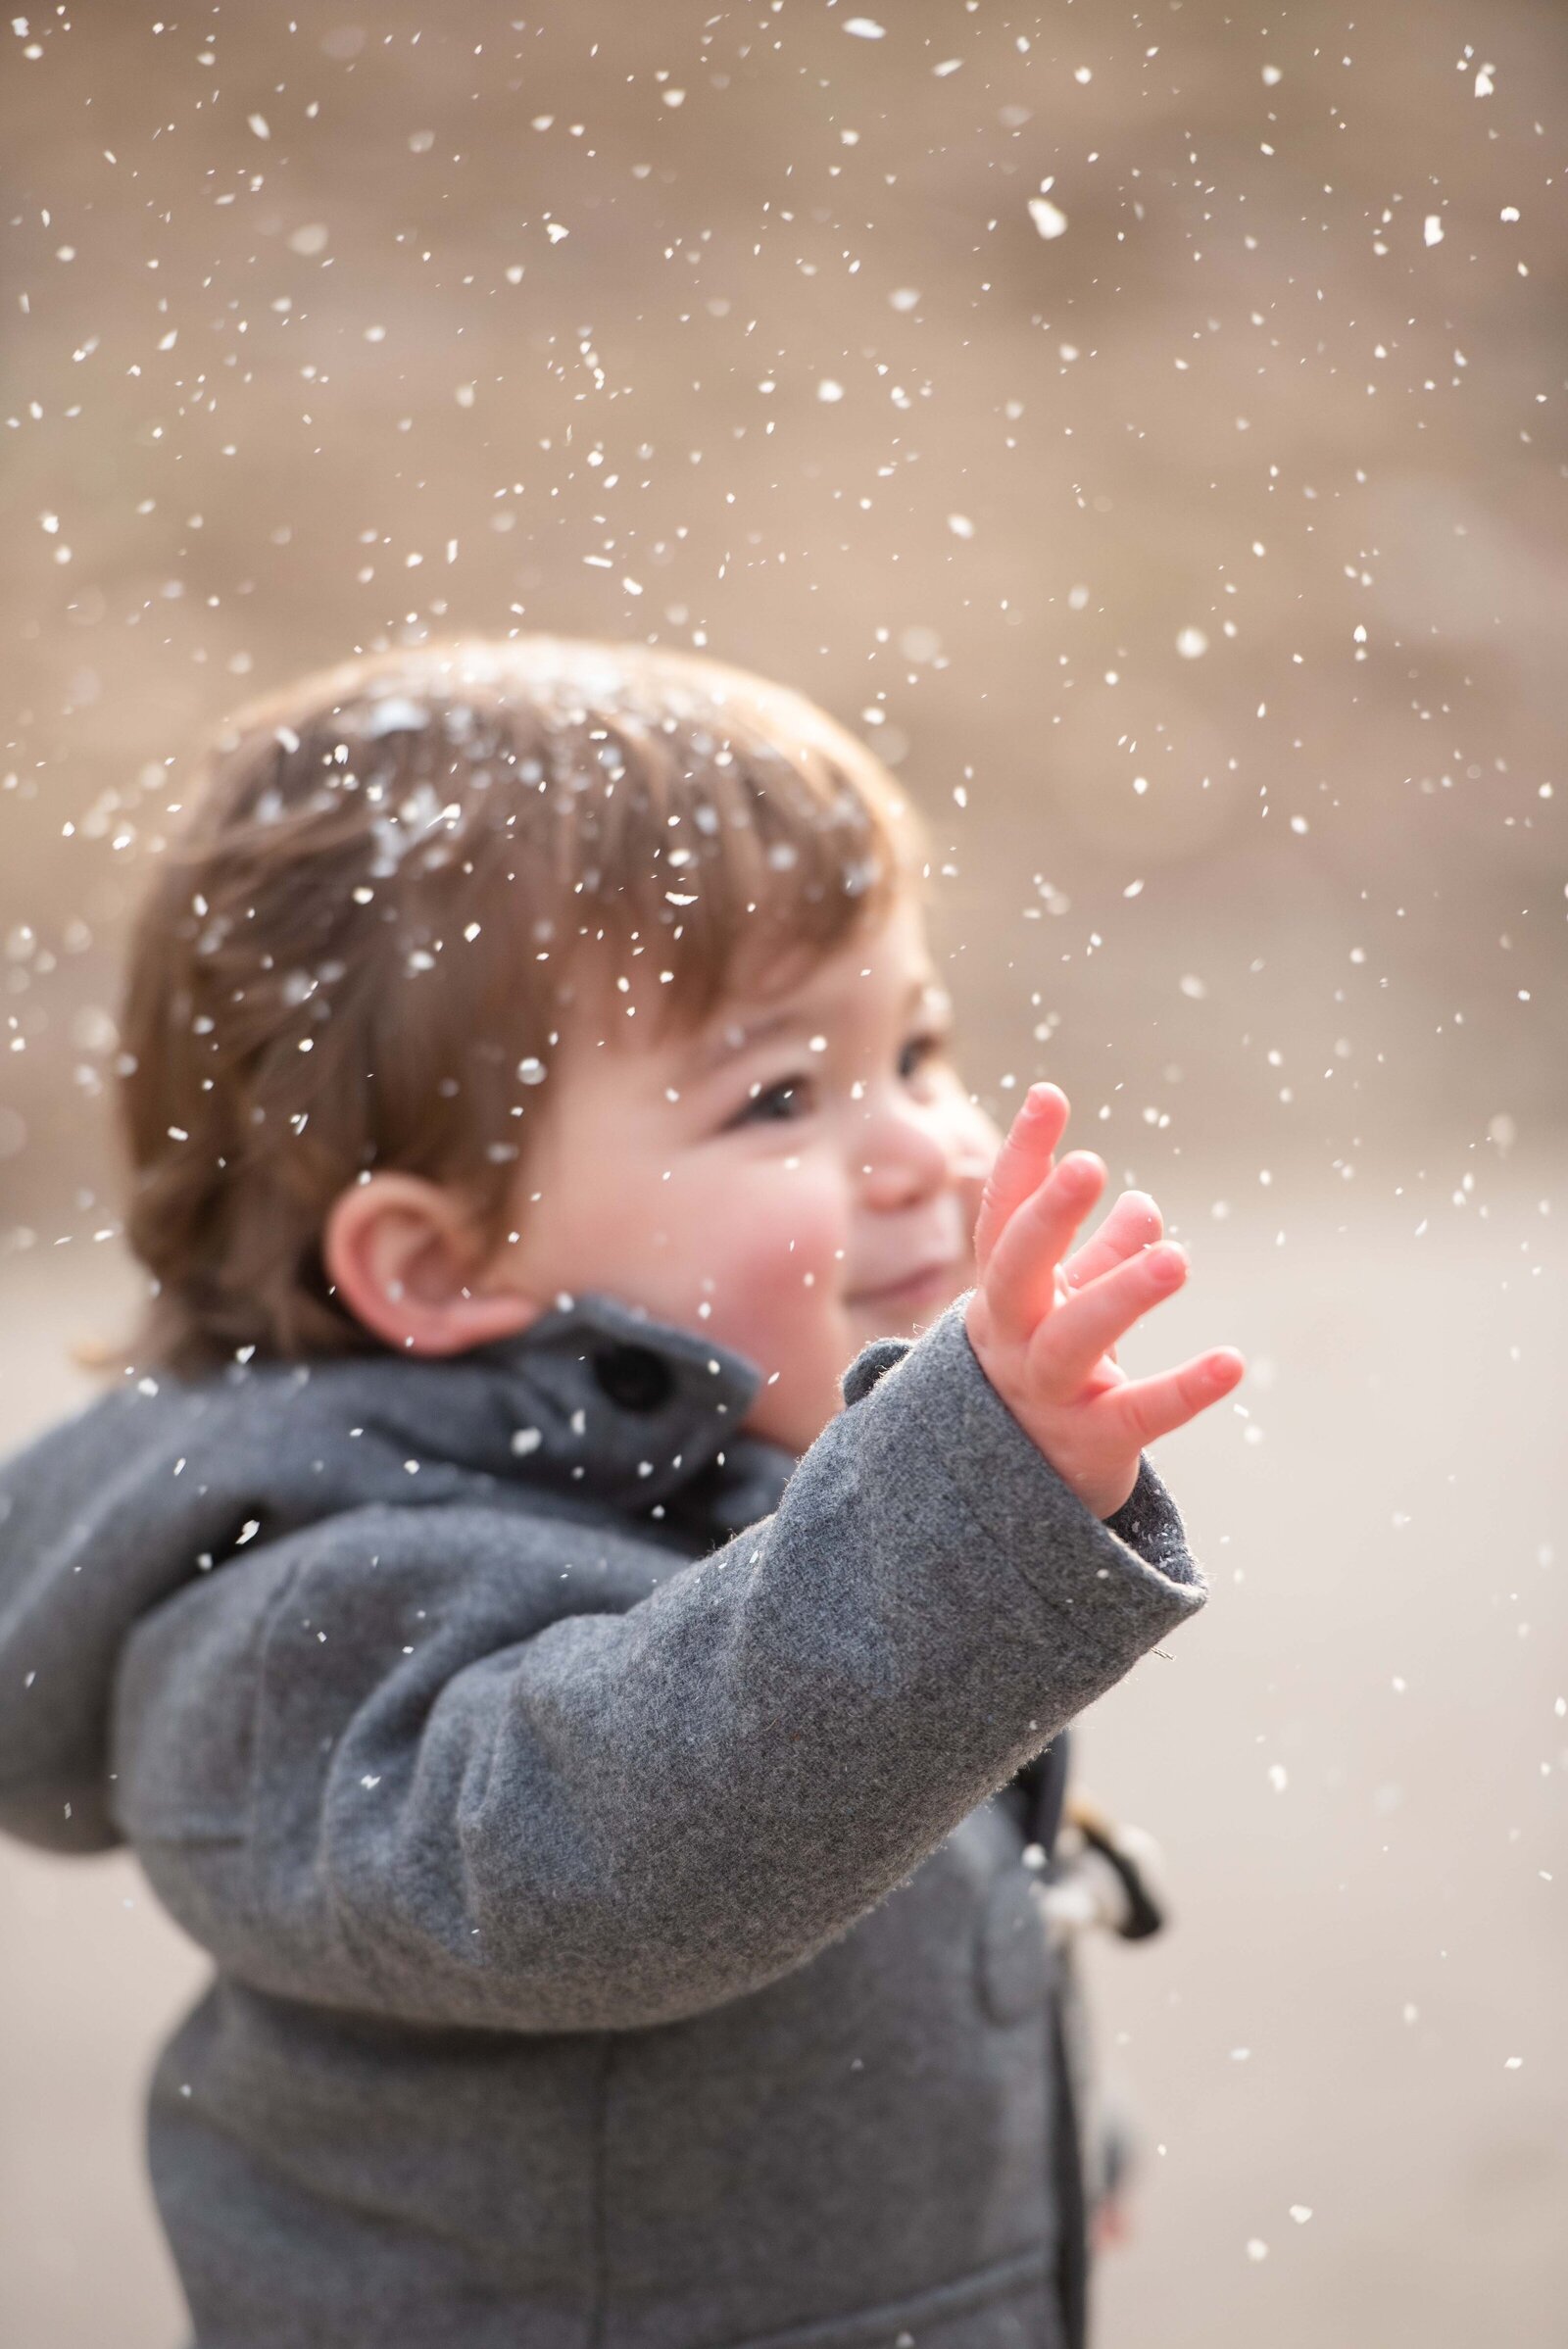 Toddler boy reaching out for snowflakes